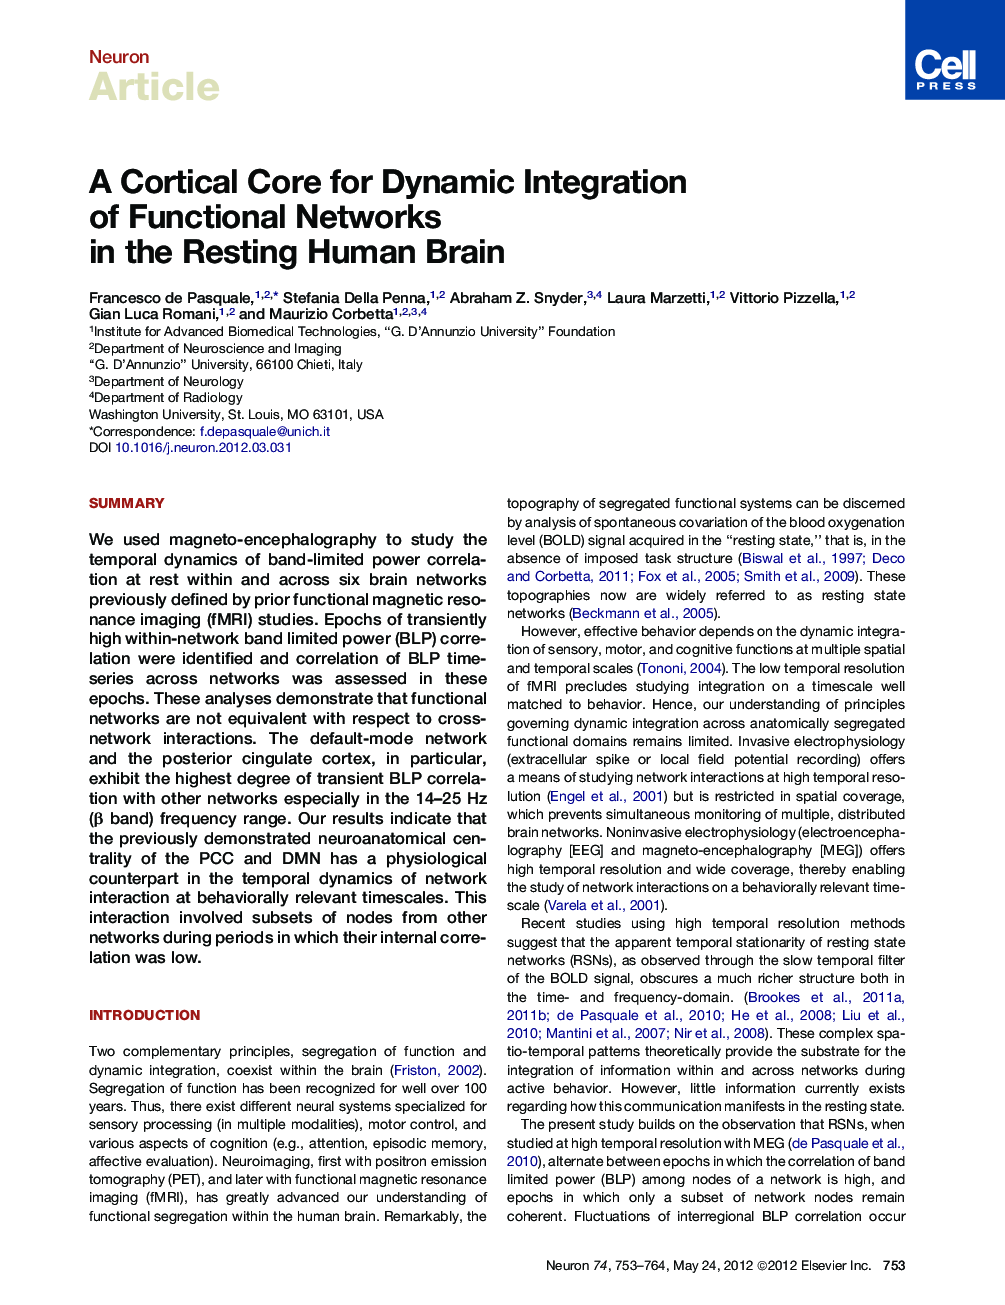 A Cortical Core for Dynamic Integration of Functional Networks in the Resting Human Brain